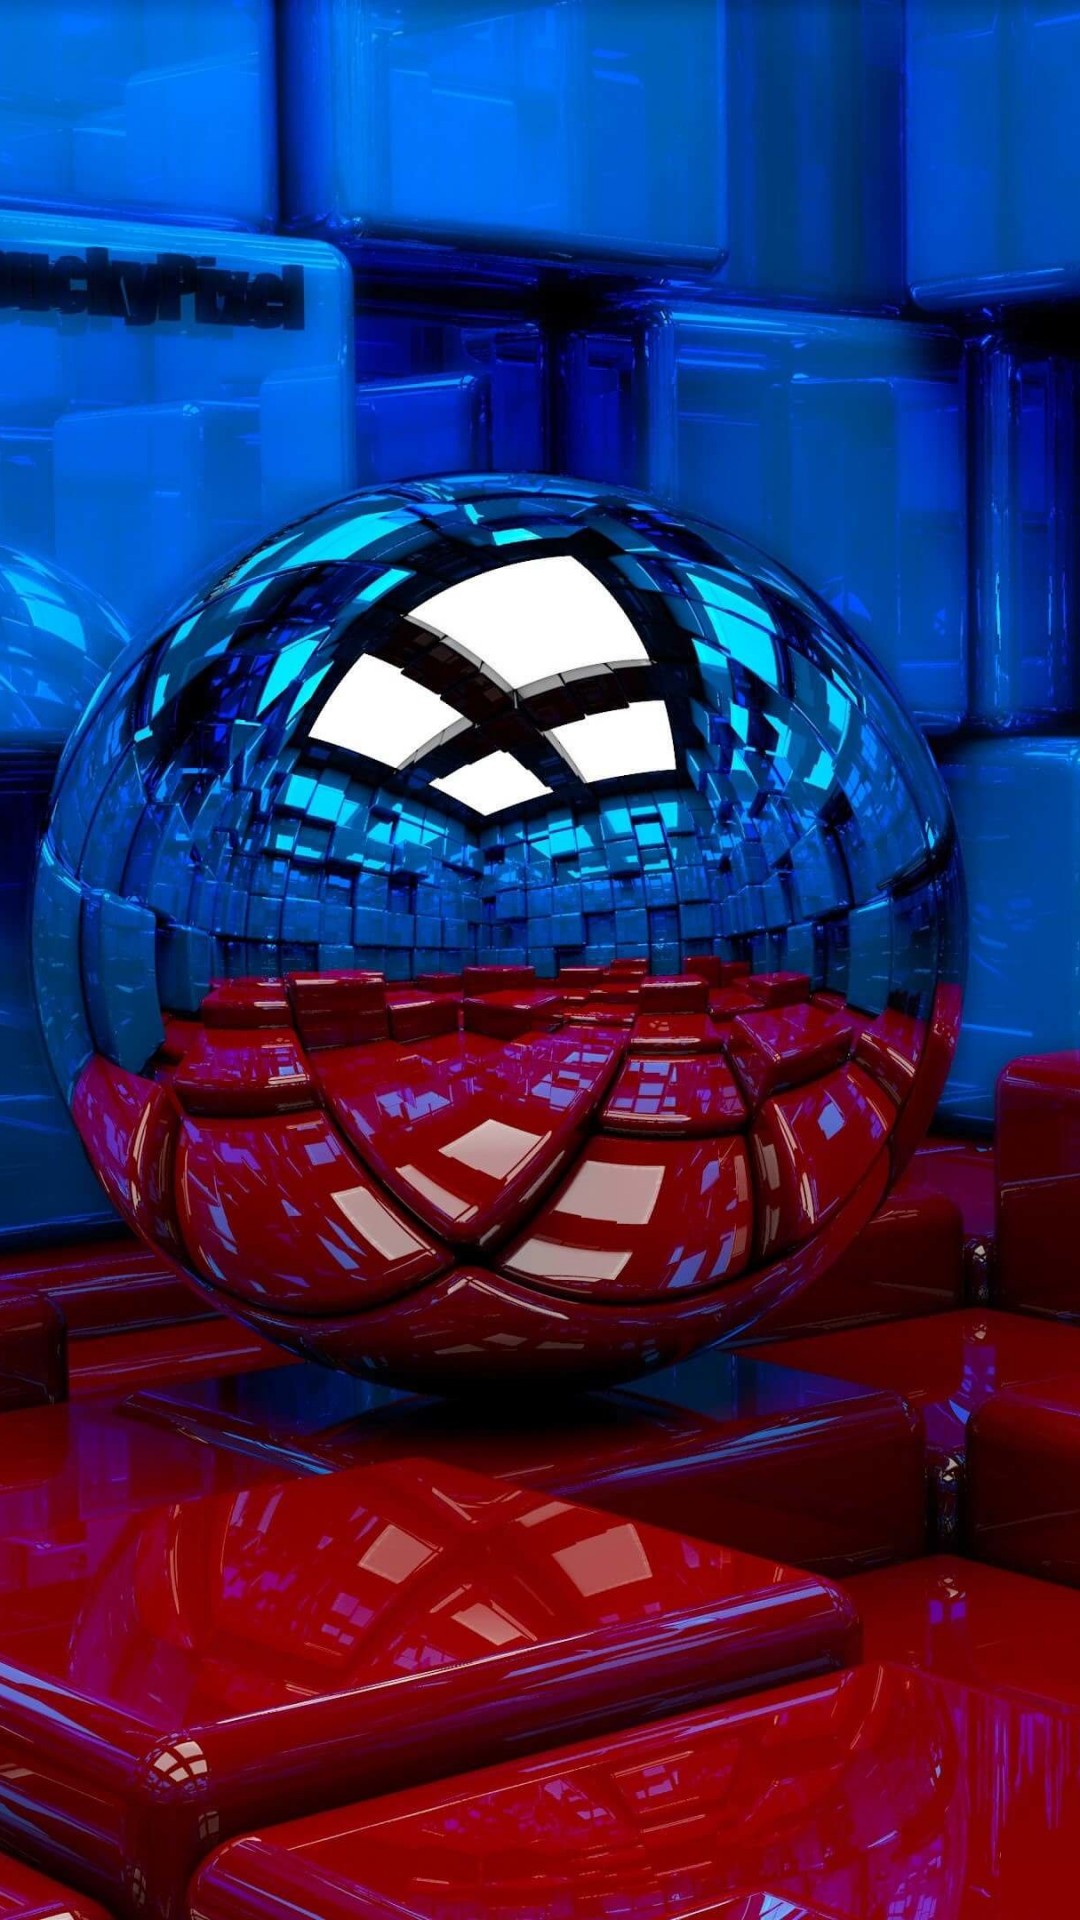 Metallic Sphere Reflecting The Cube Room Wallpaper for SONY Xperia Z1